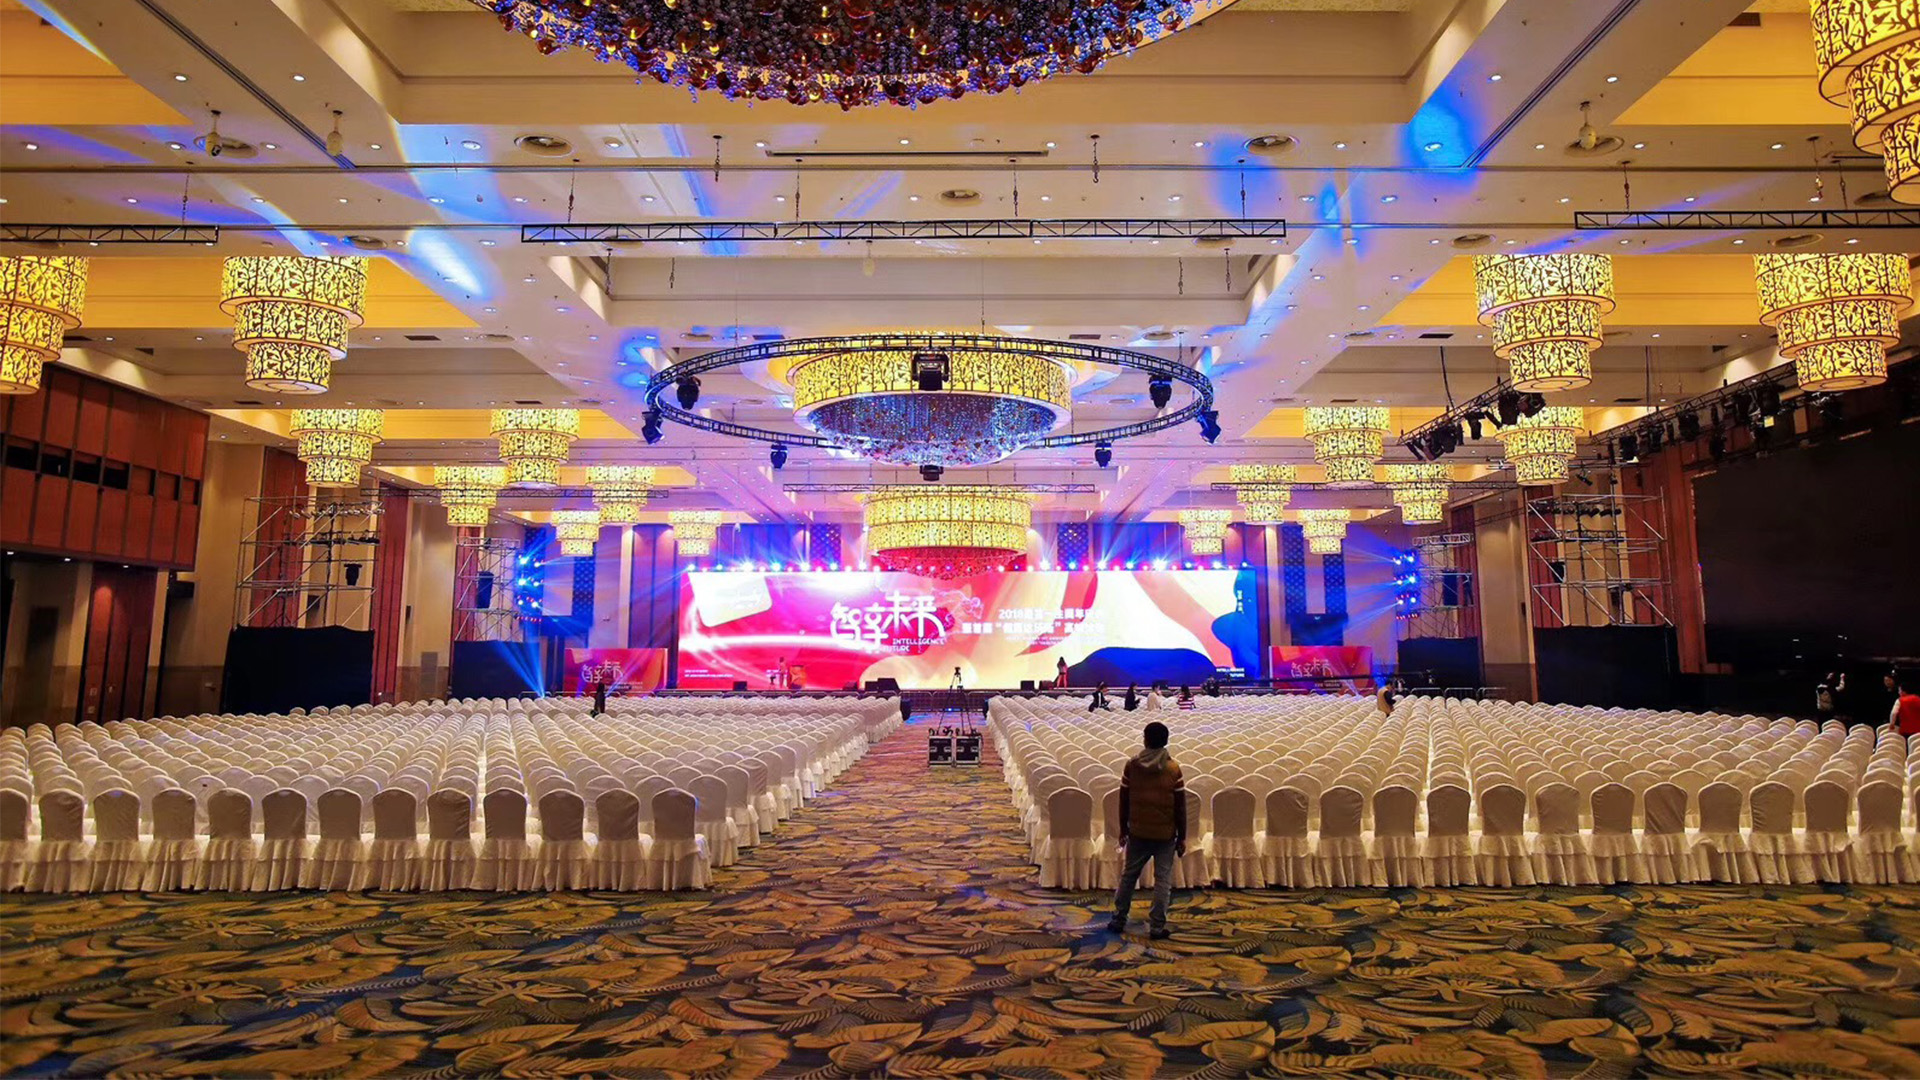 It is an Conference Event and Launching Event for Intelligence Future by D2 Studio Event Planner Event Agency Event Planner Hong Kong and Guangzhou China who does Event Planning for Conference Event and Launching Event 2